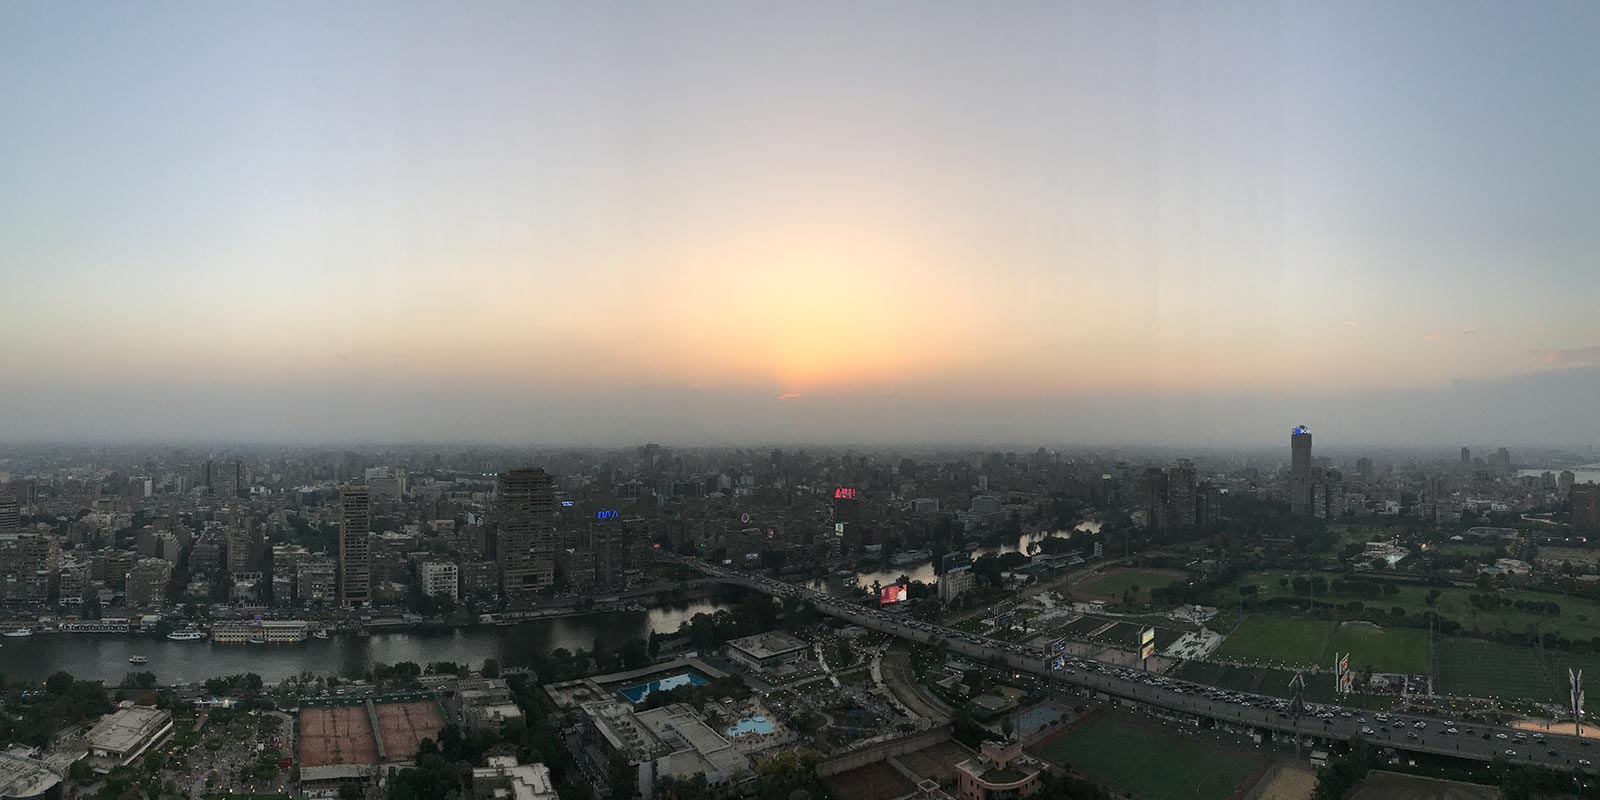 Sunset at Cairo, Egypt. Getting inside the Ancient Pyramids of Giza